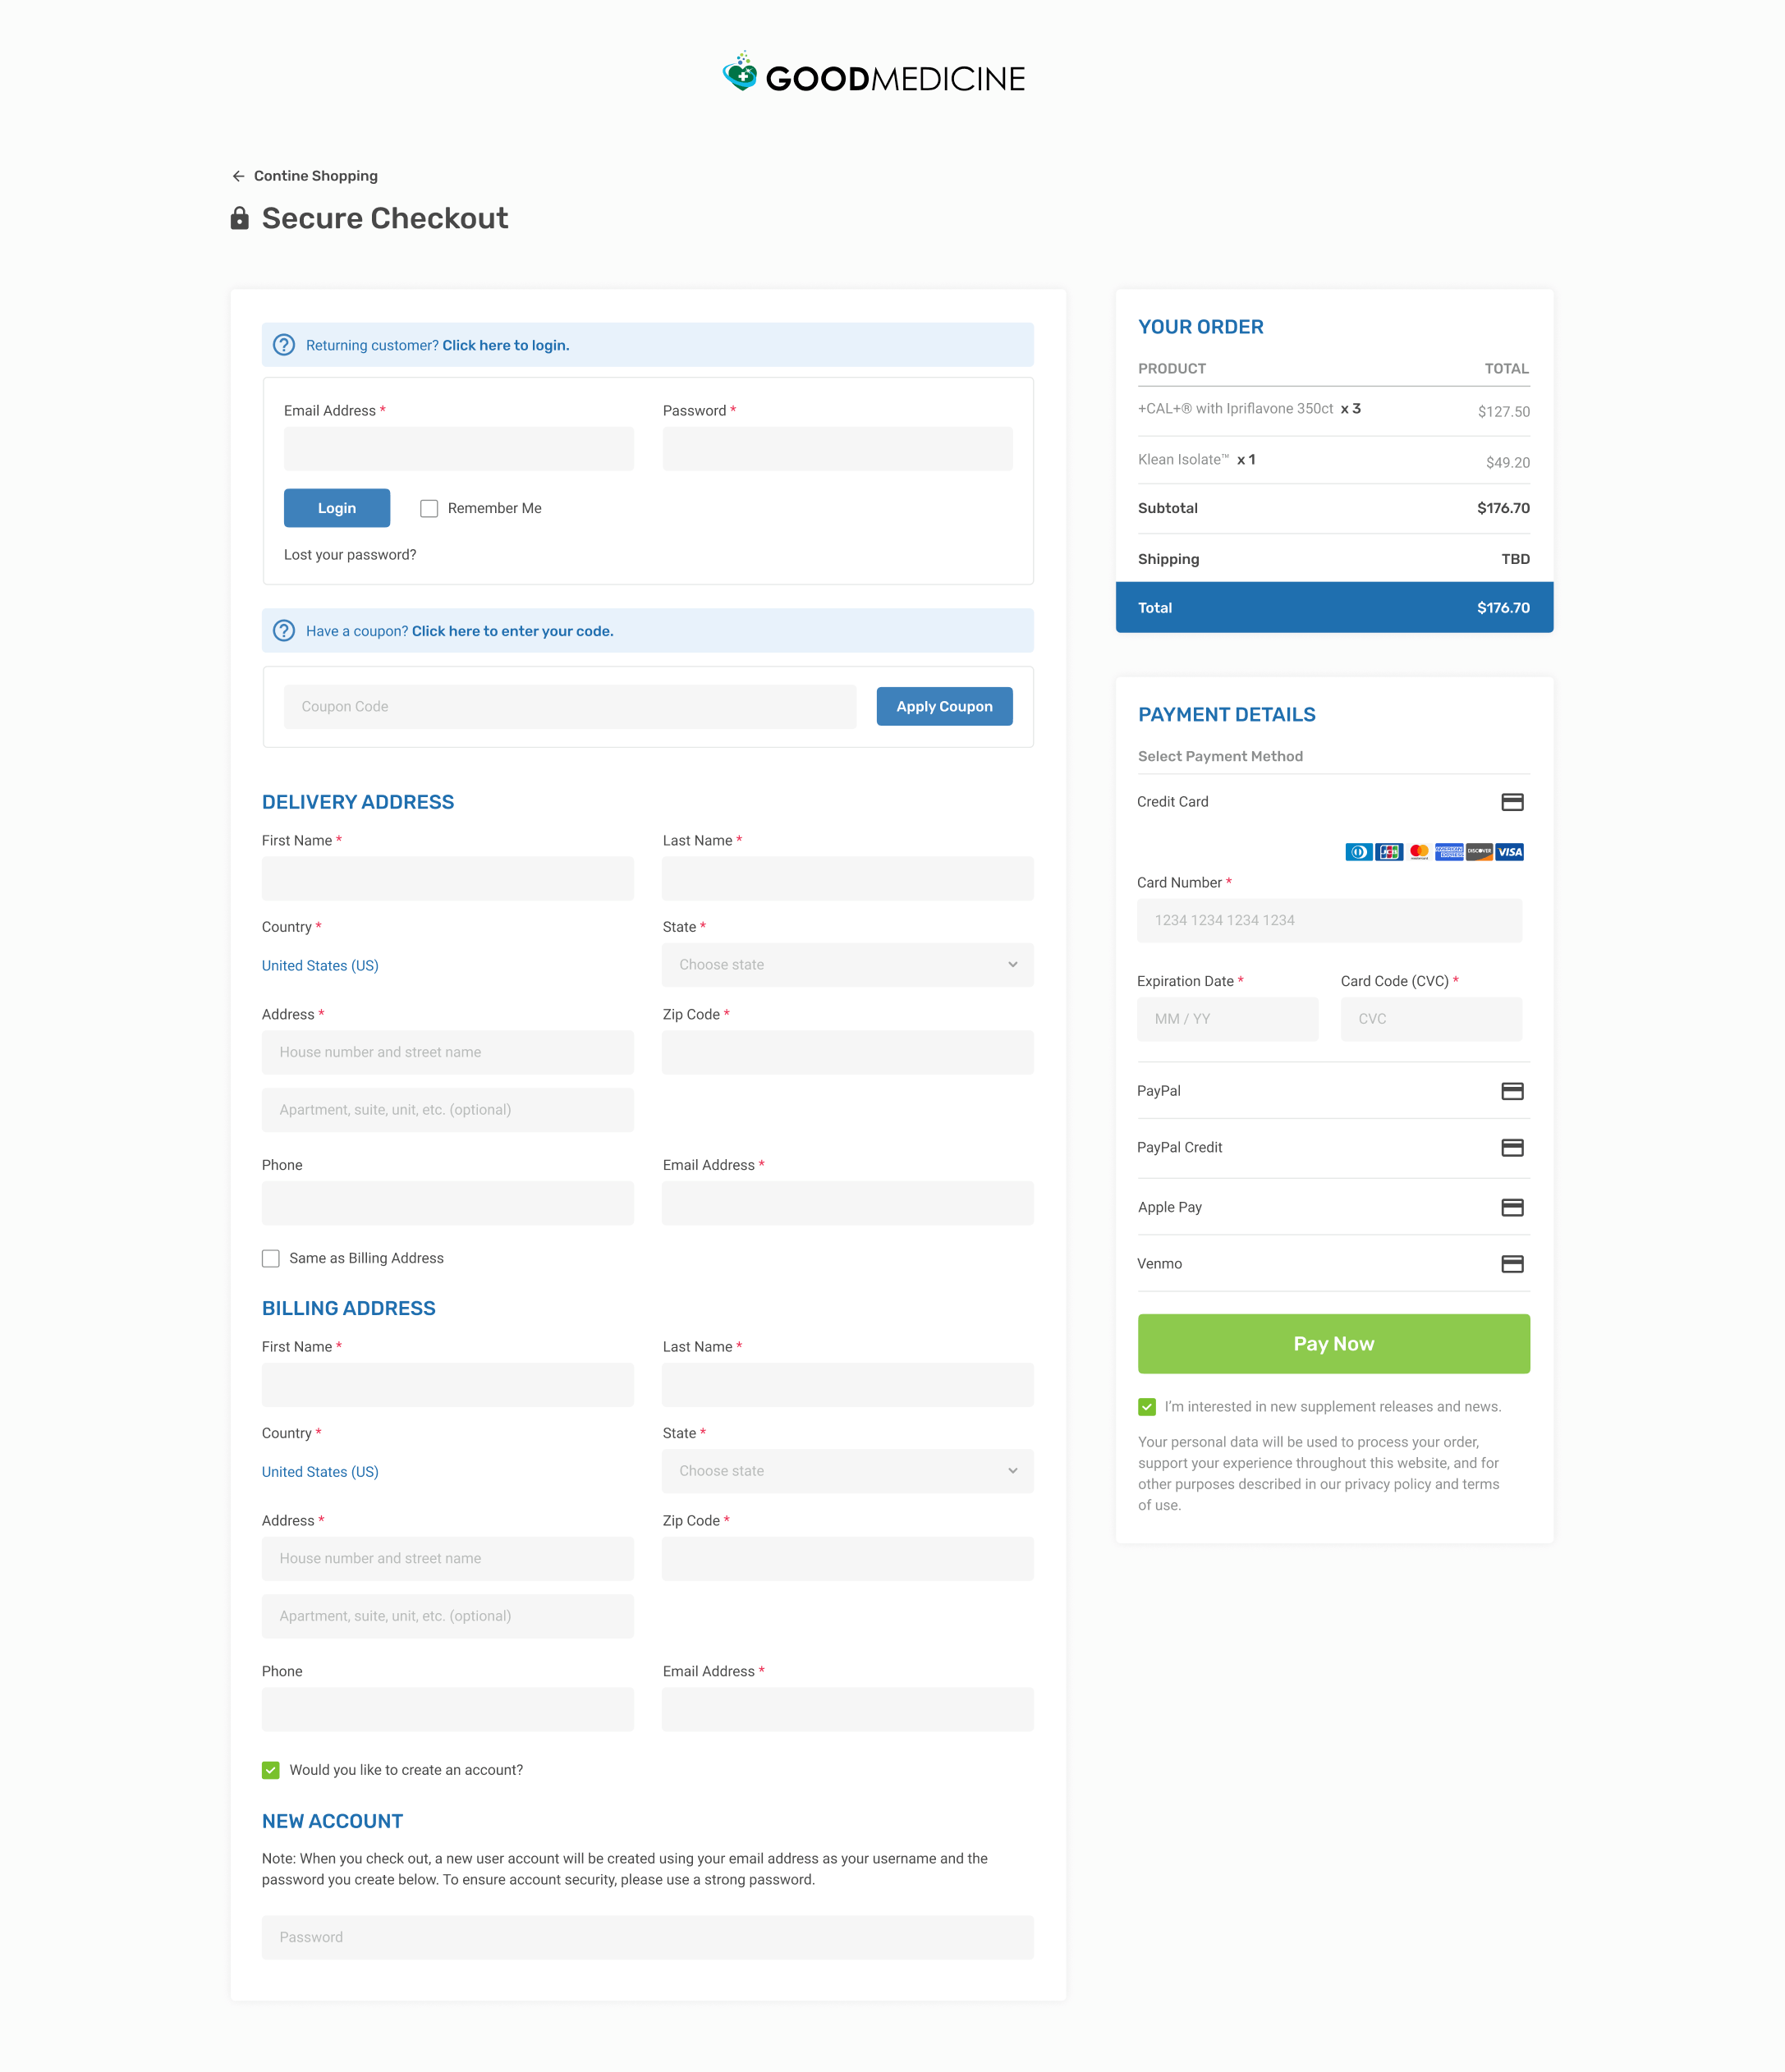 A screenshot of the checkout page